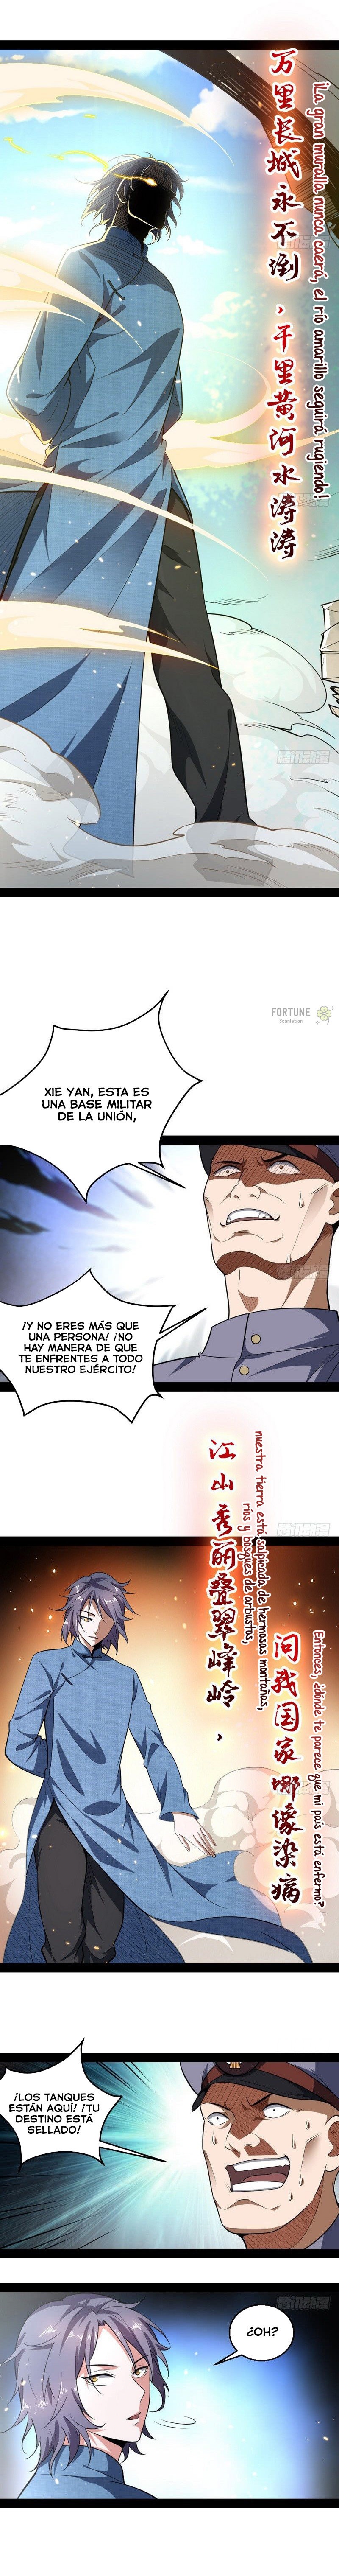 Manga Soy un dios maligno Chapter 22 image number 18